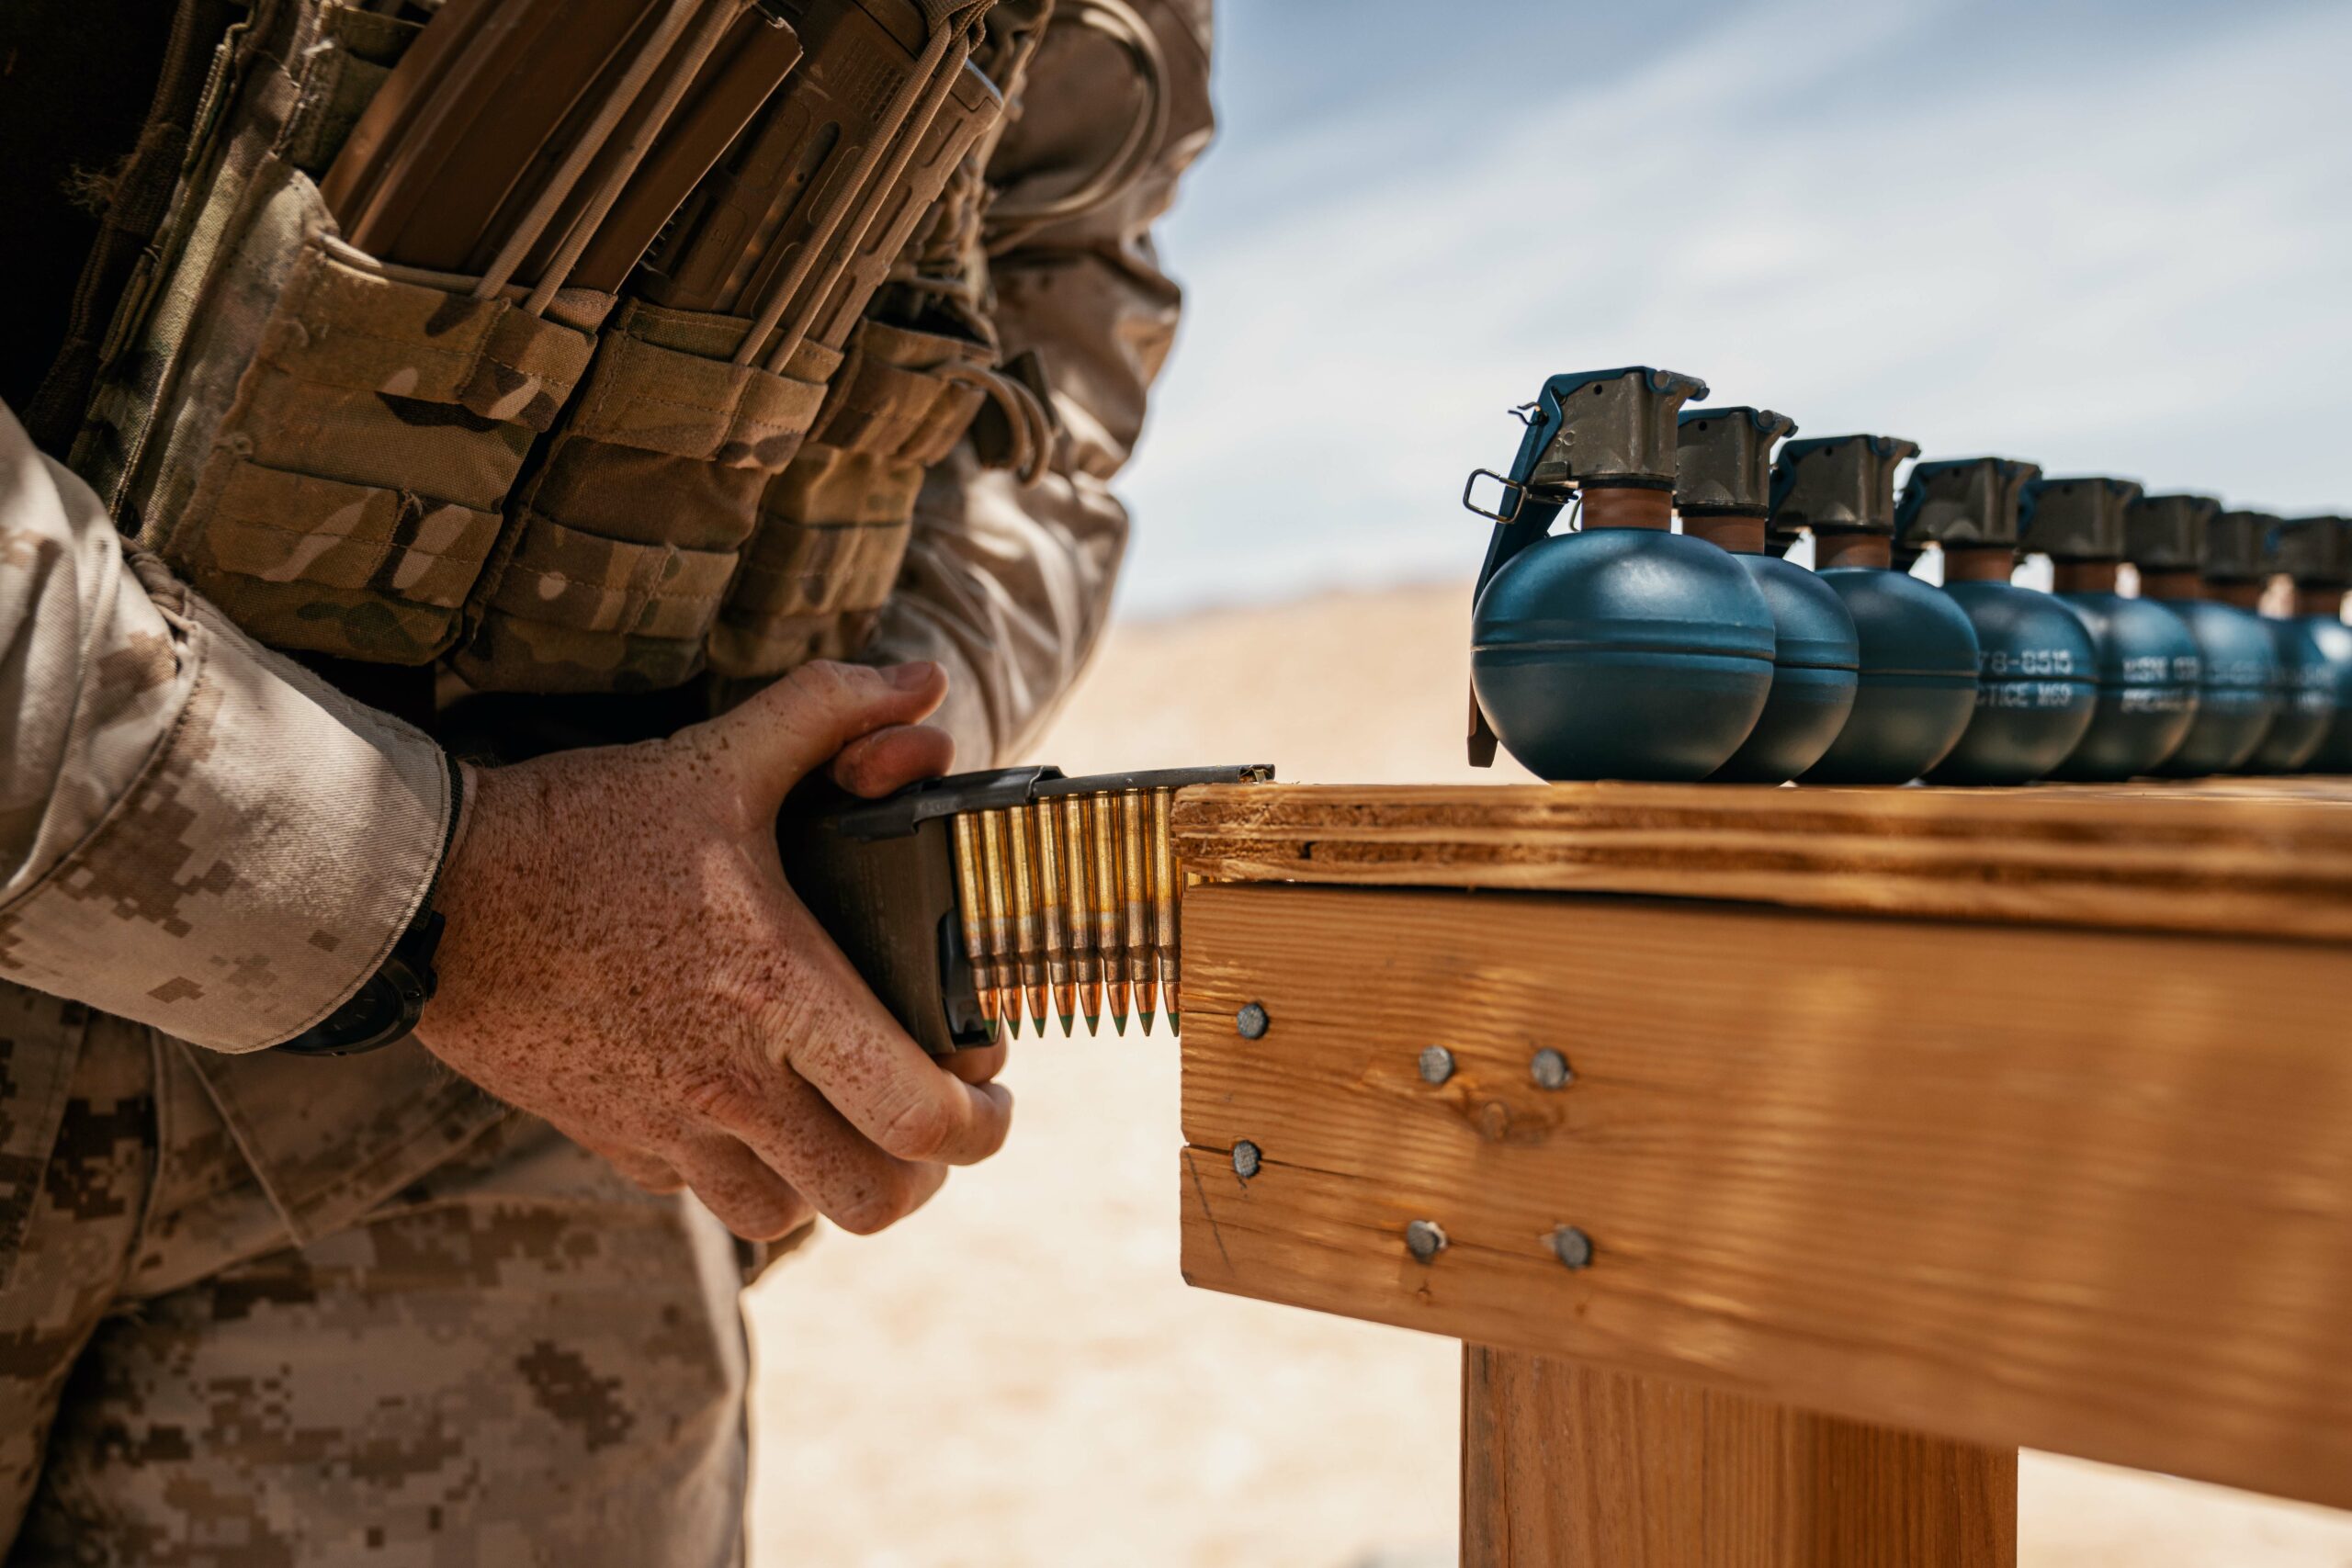 A Marine loads 5.56 rounds into a magazine before a live fire exercise.